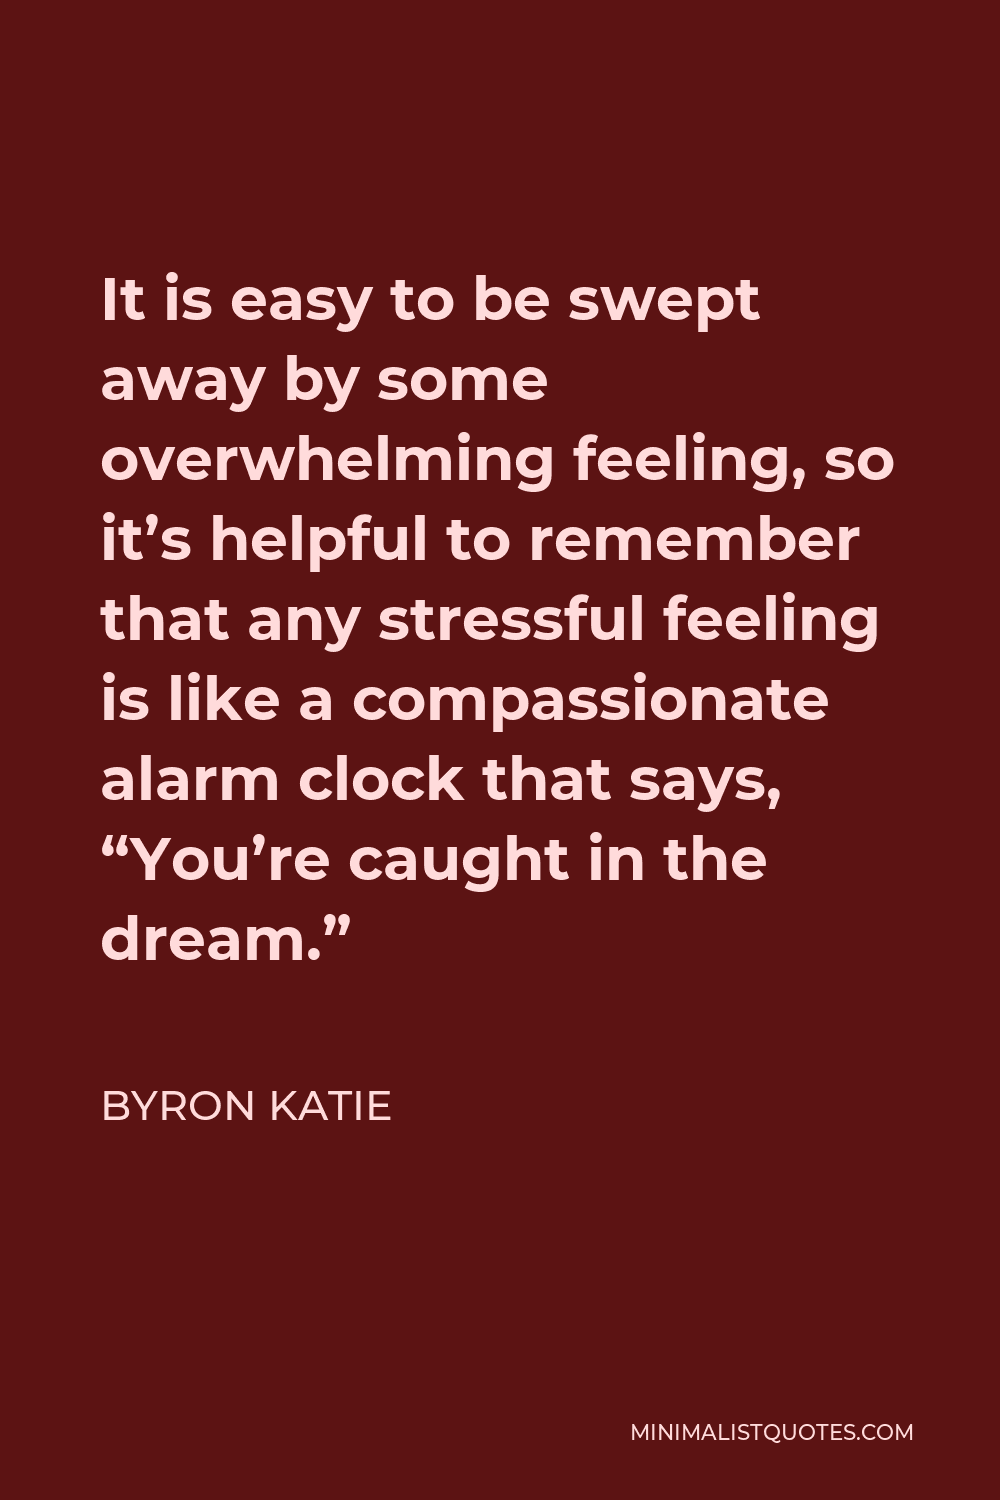 Byron Katie Quote - It is easy to be swept away by some overwhelming feeling, so it’s helpful to remember that any stressful feeling is like a compassionate alarm clock that says, “You’re caught in the dream.”